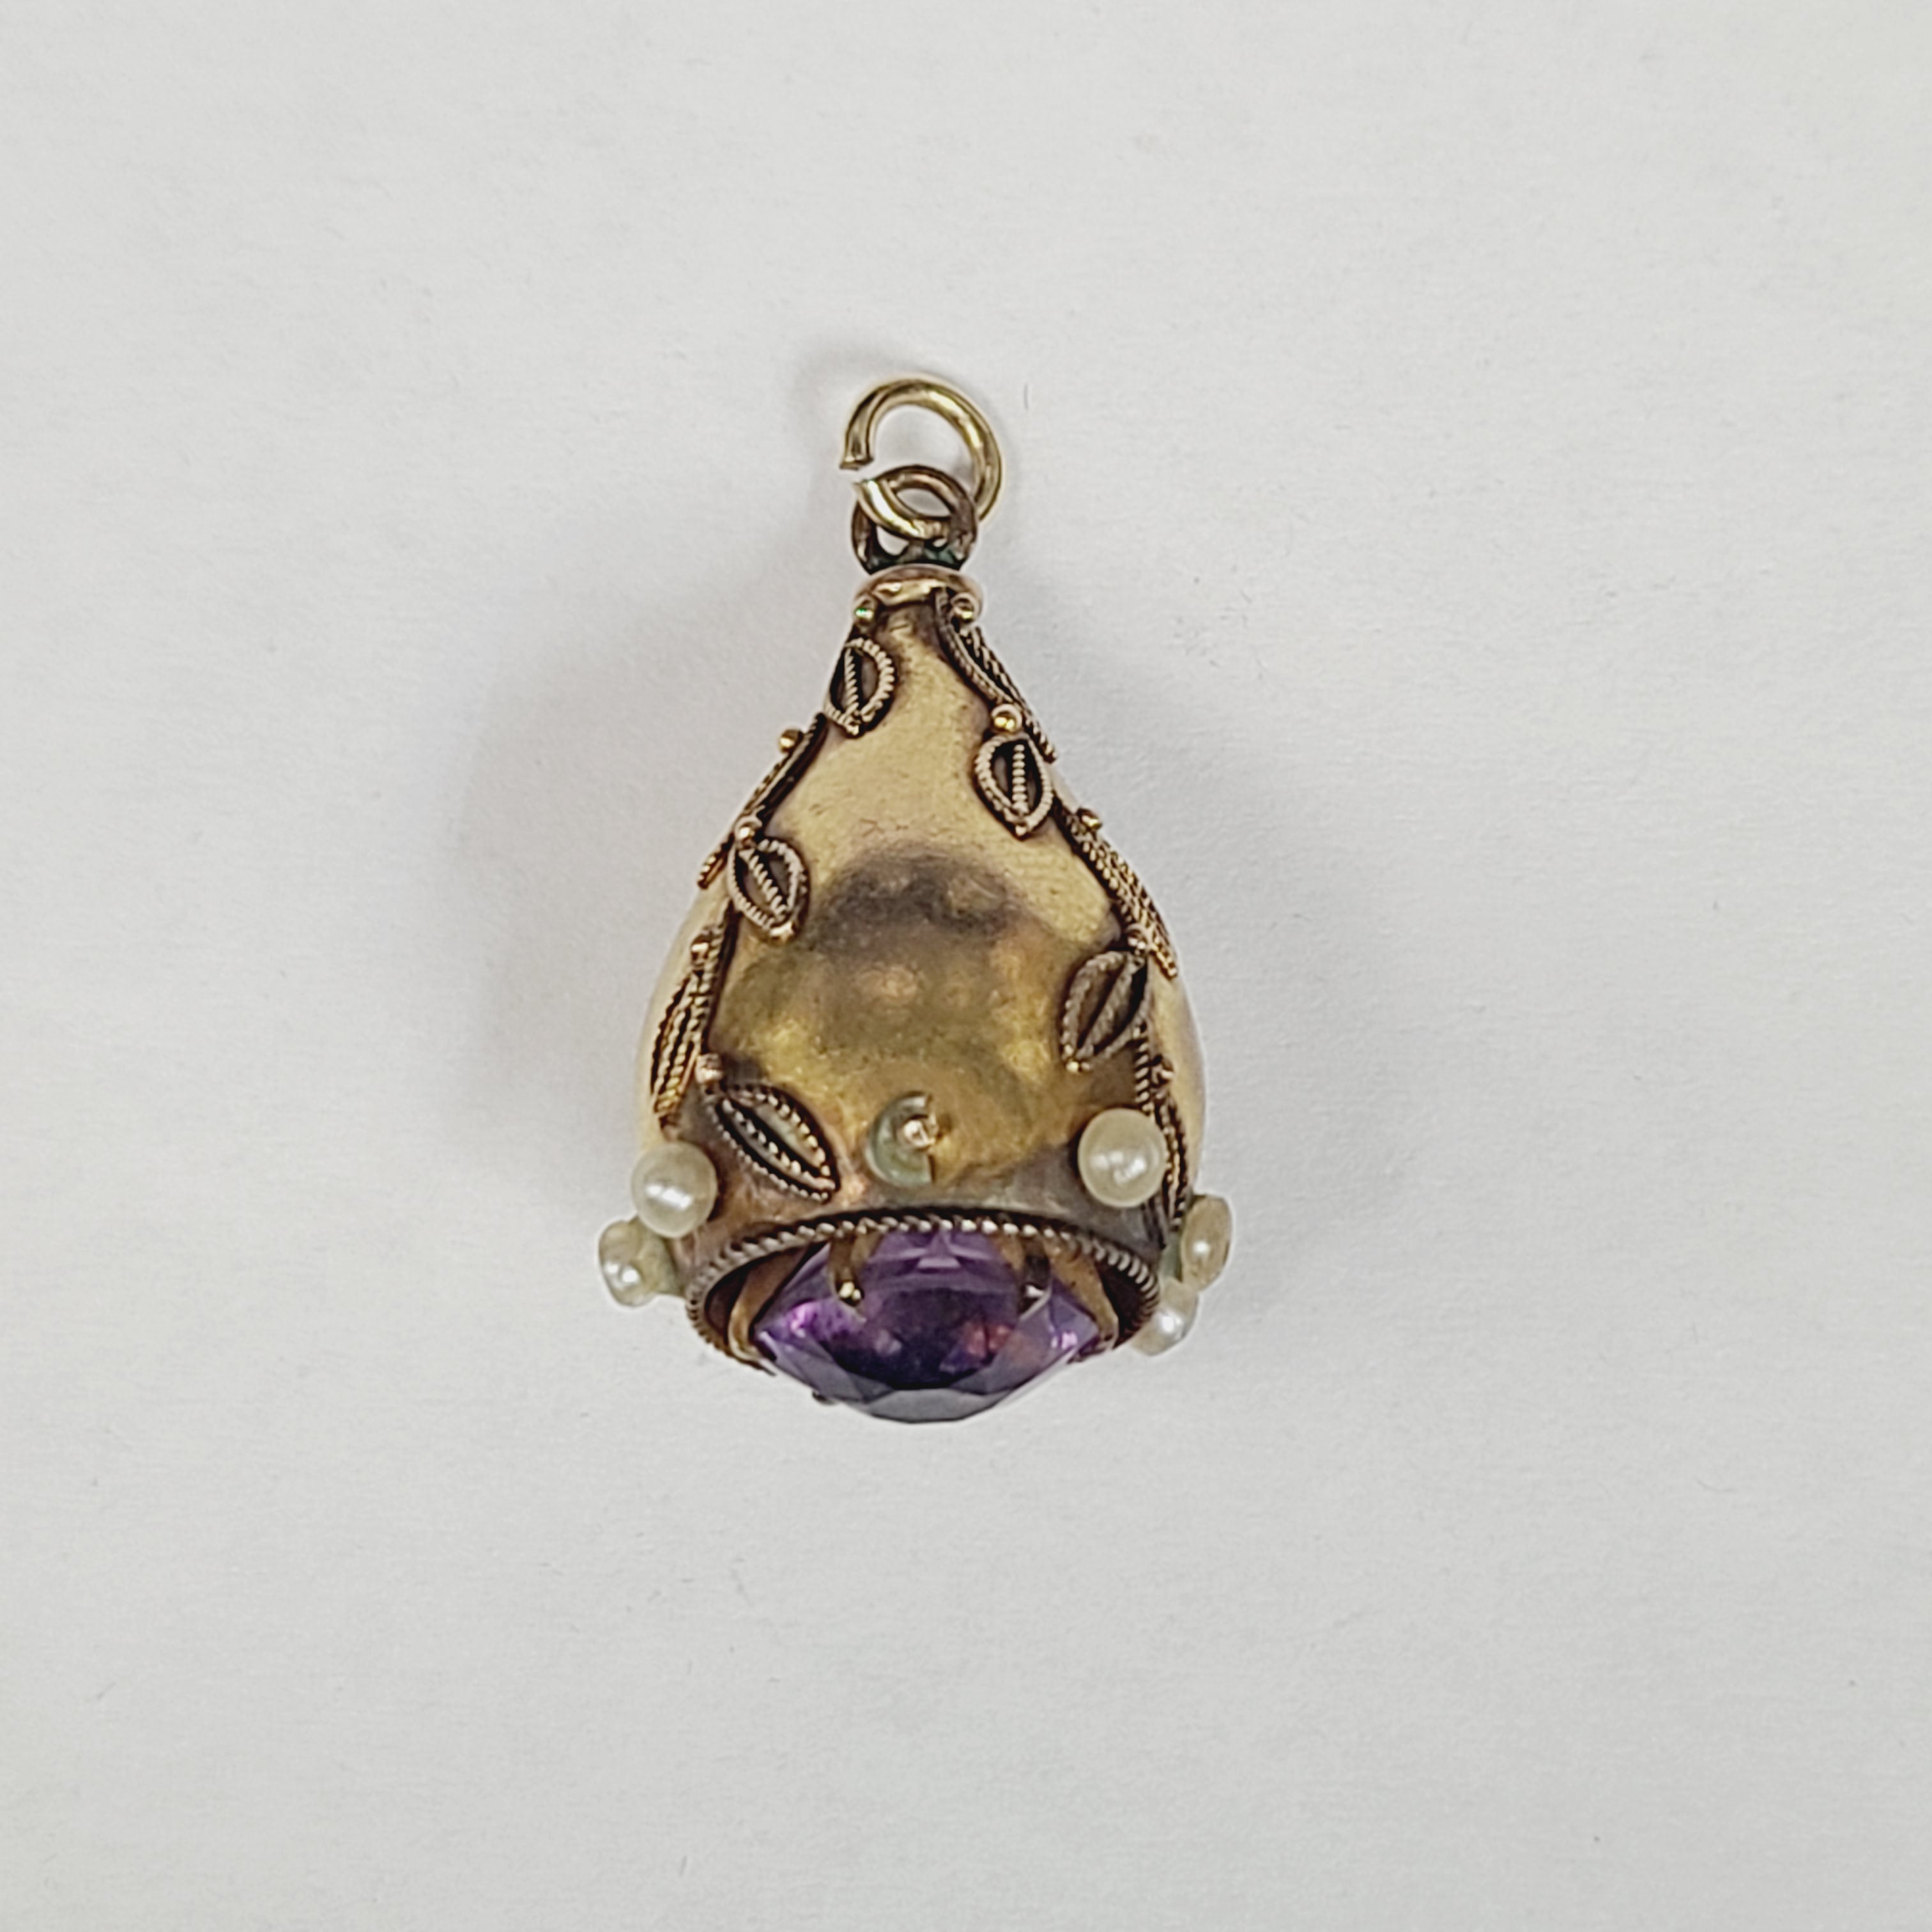 18K Gold Pearl and Amethyst Fob Charm Pendant